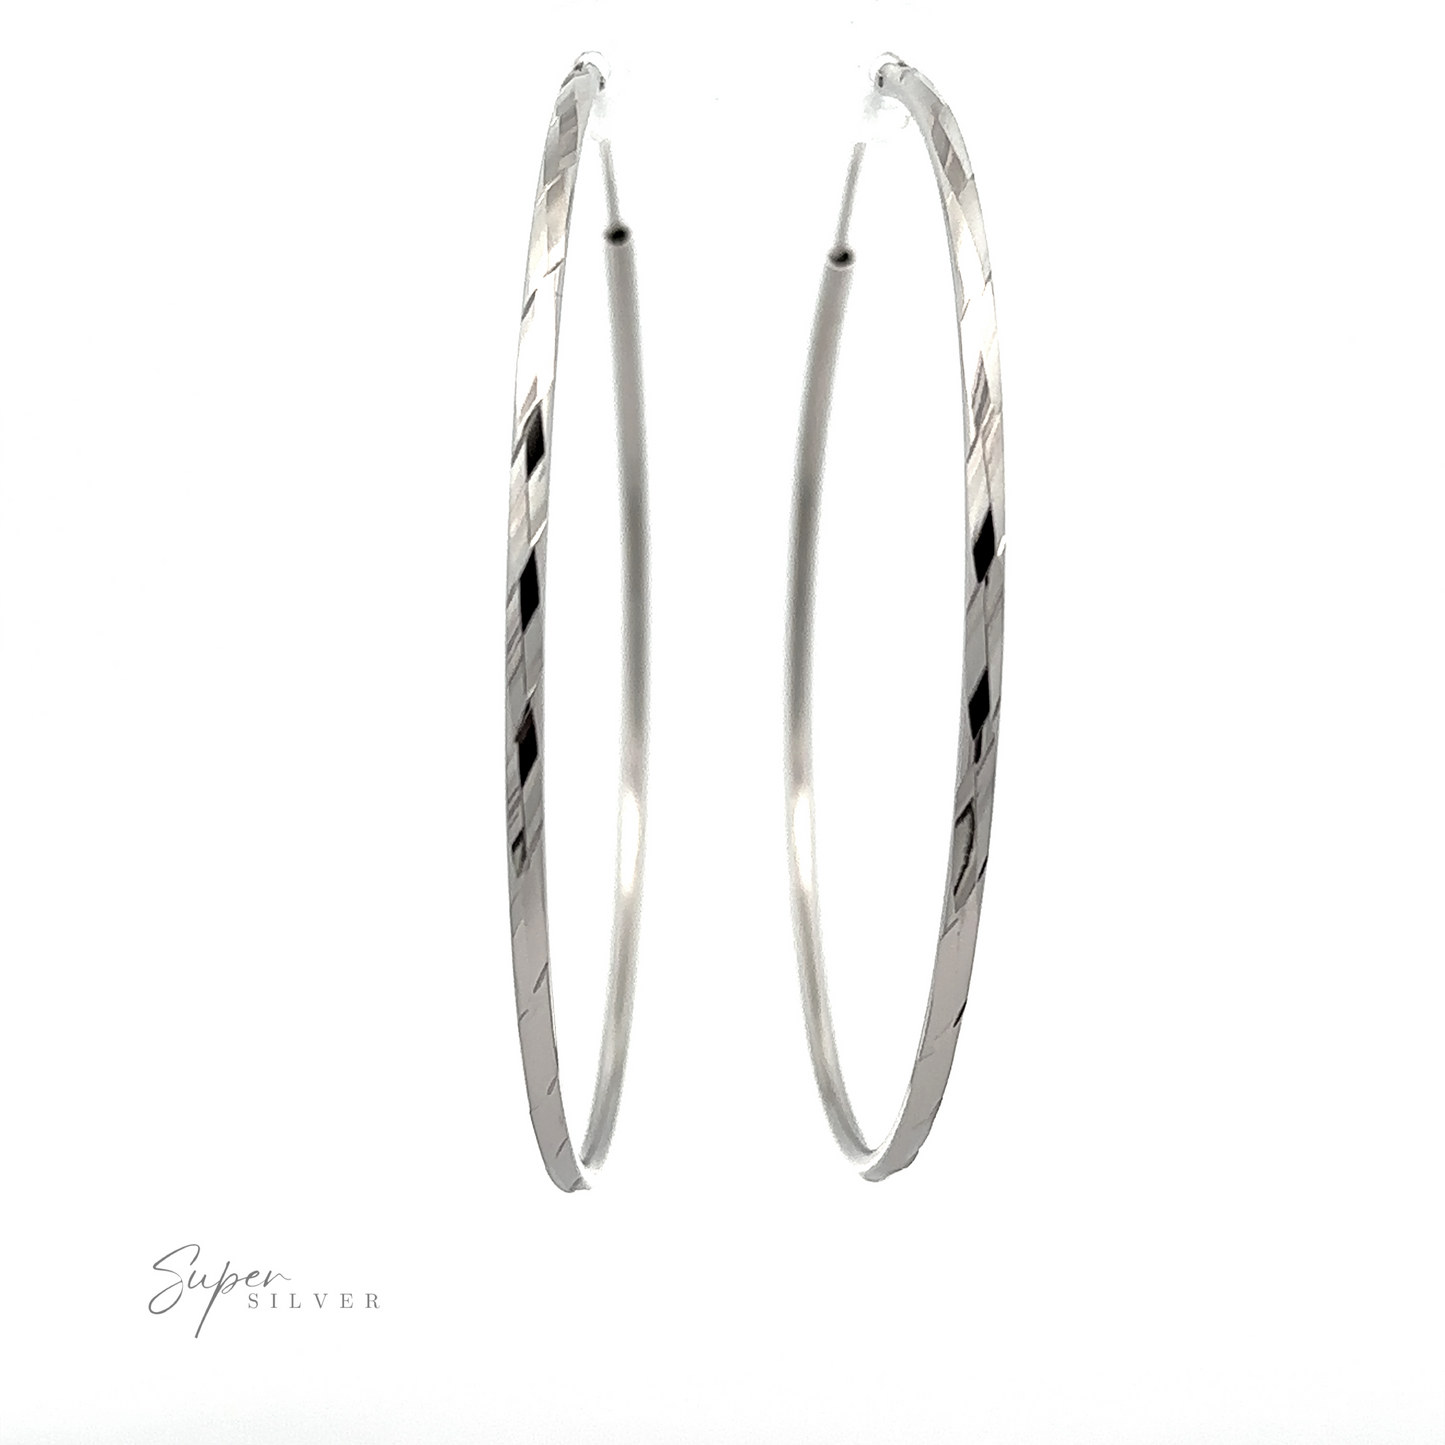 A pair of Brilliant 60mm Rhodium Finish Faceted Hoops, displayed against a white background.